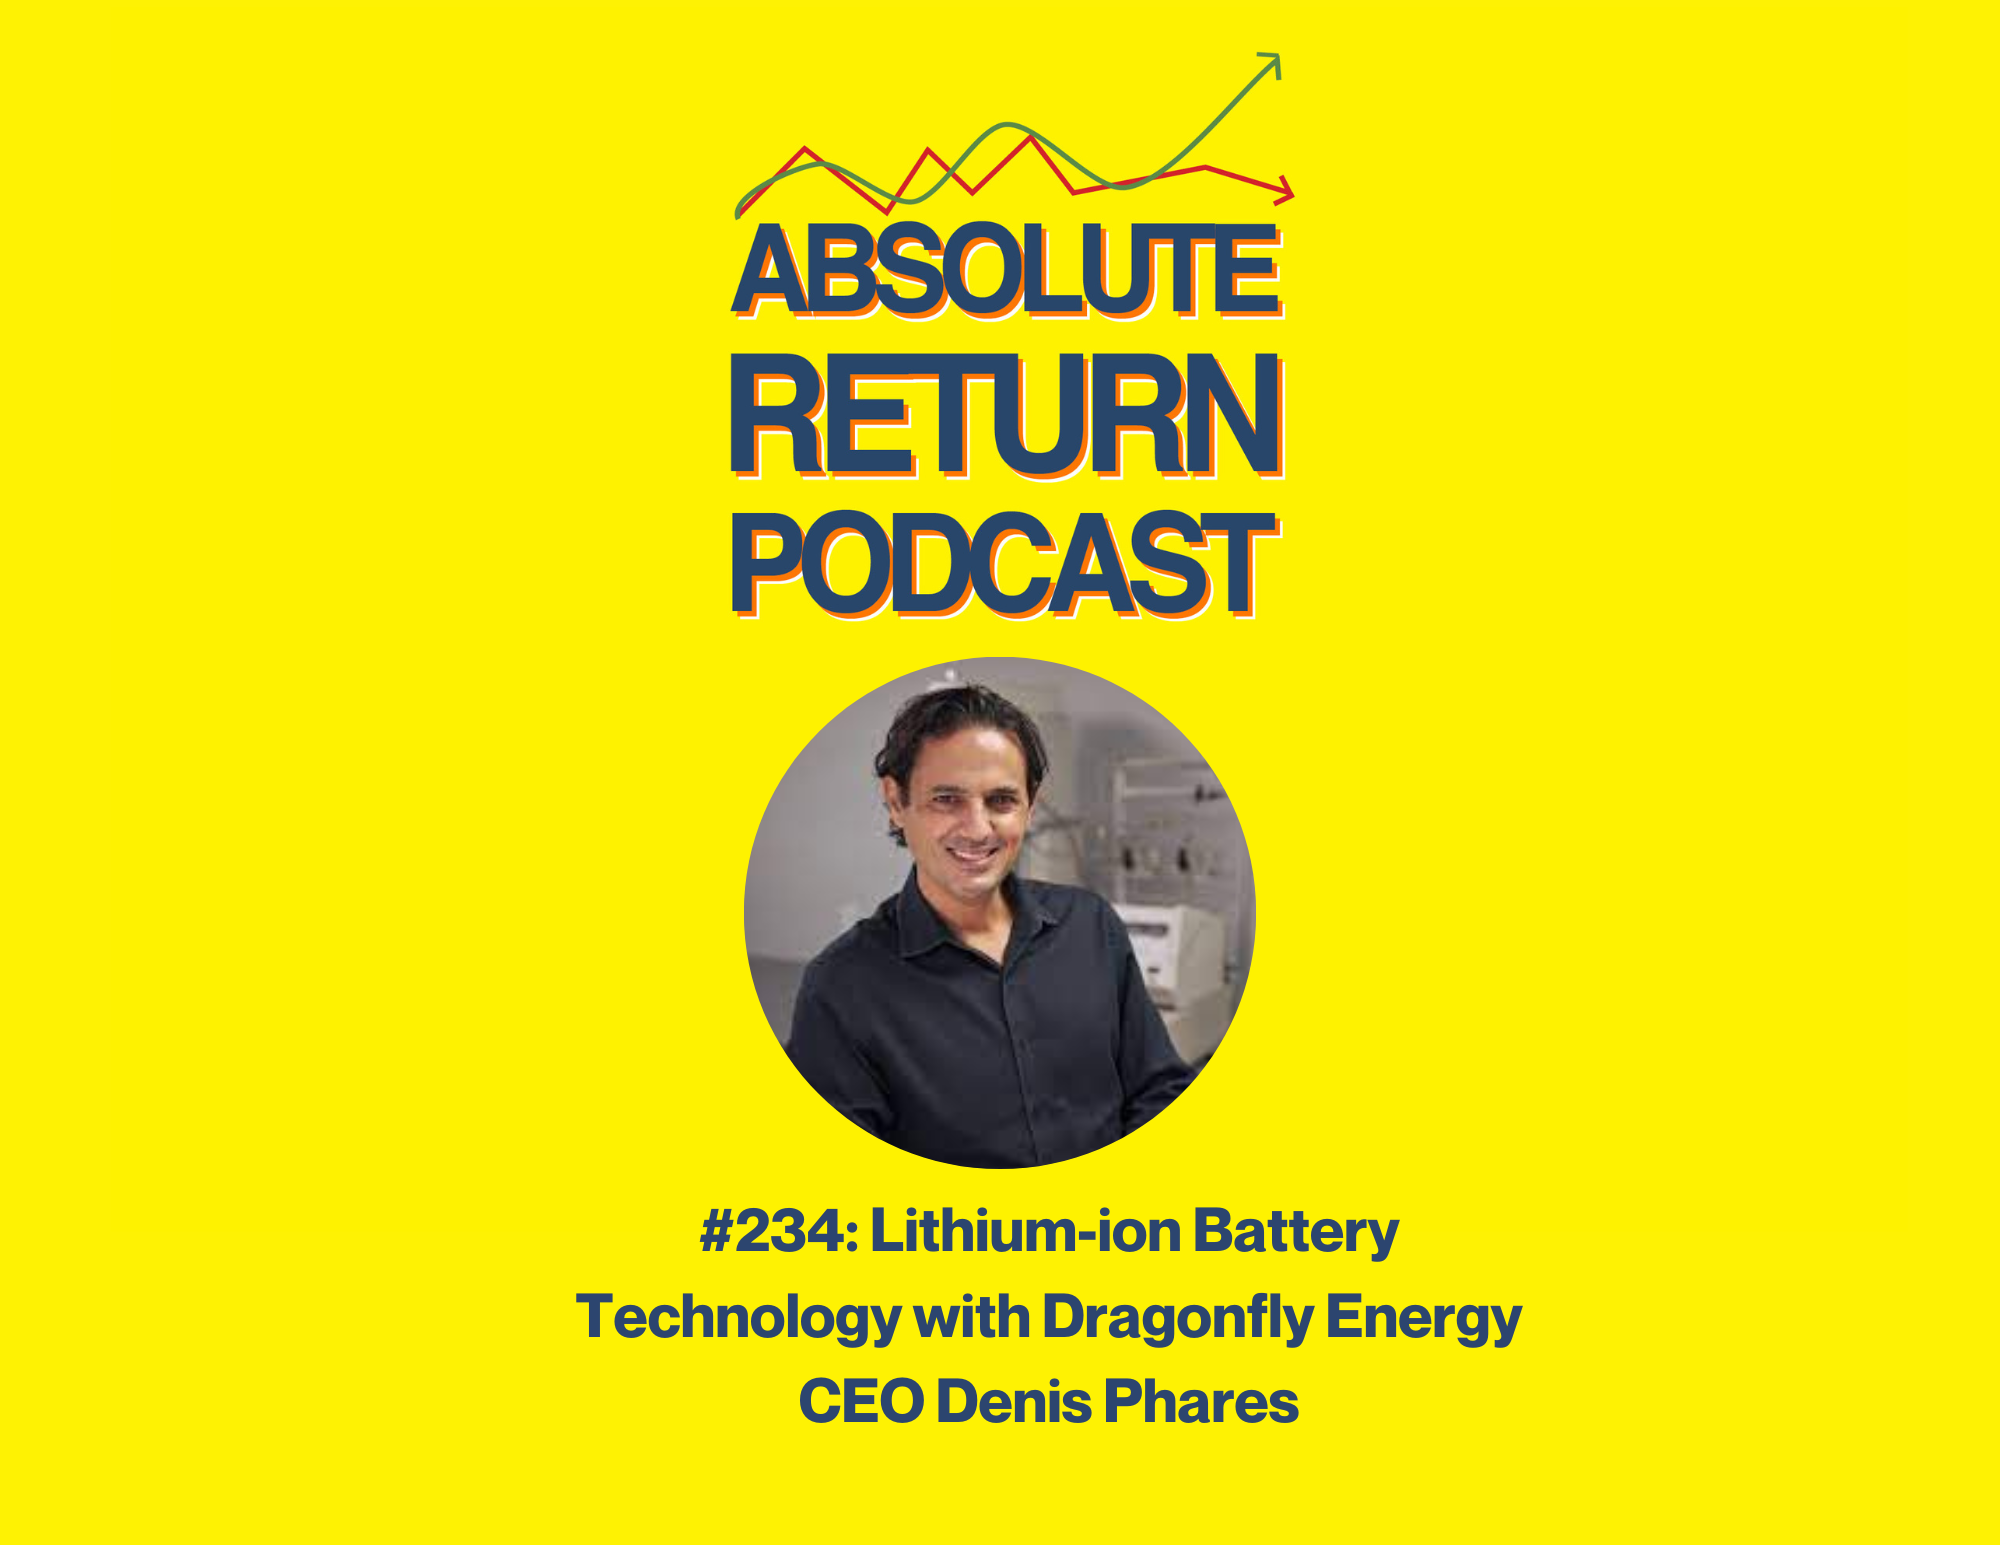 Absolute Return Podcast #234: Lithium-ion Battery Technology with Dragonfly Energy CEO Denis Phares